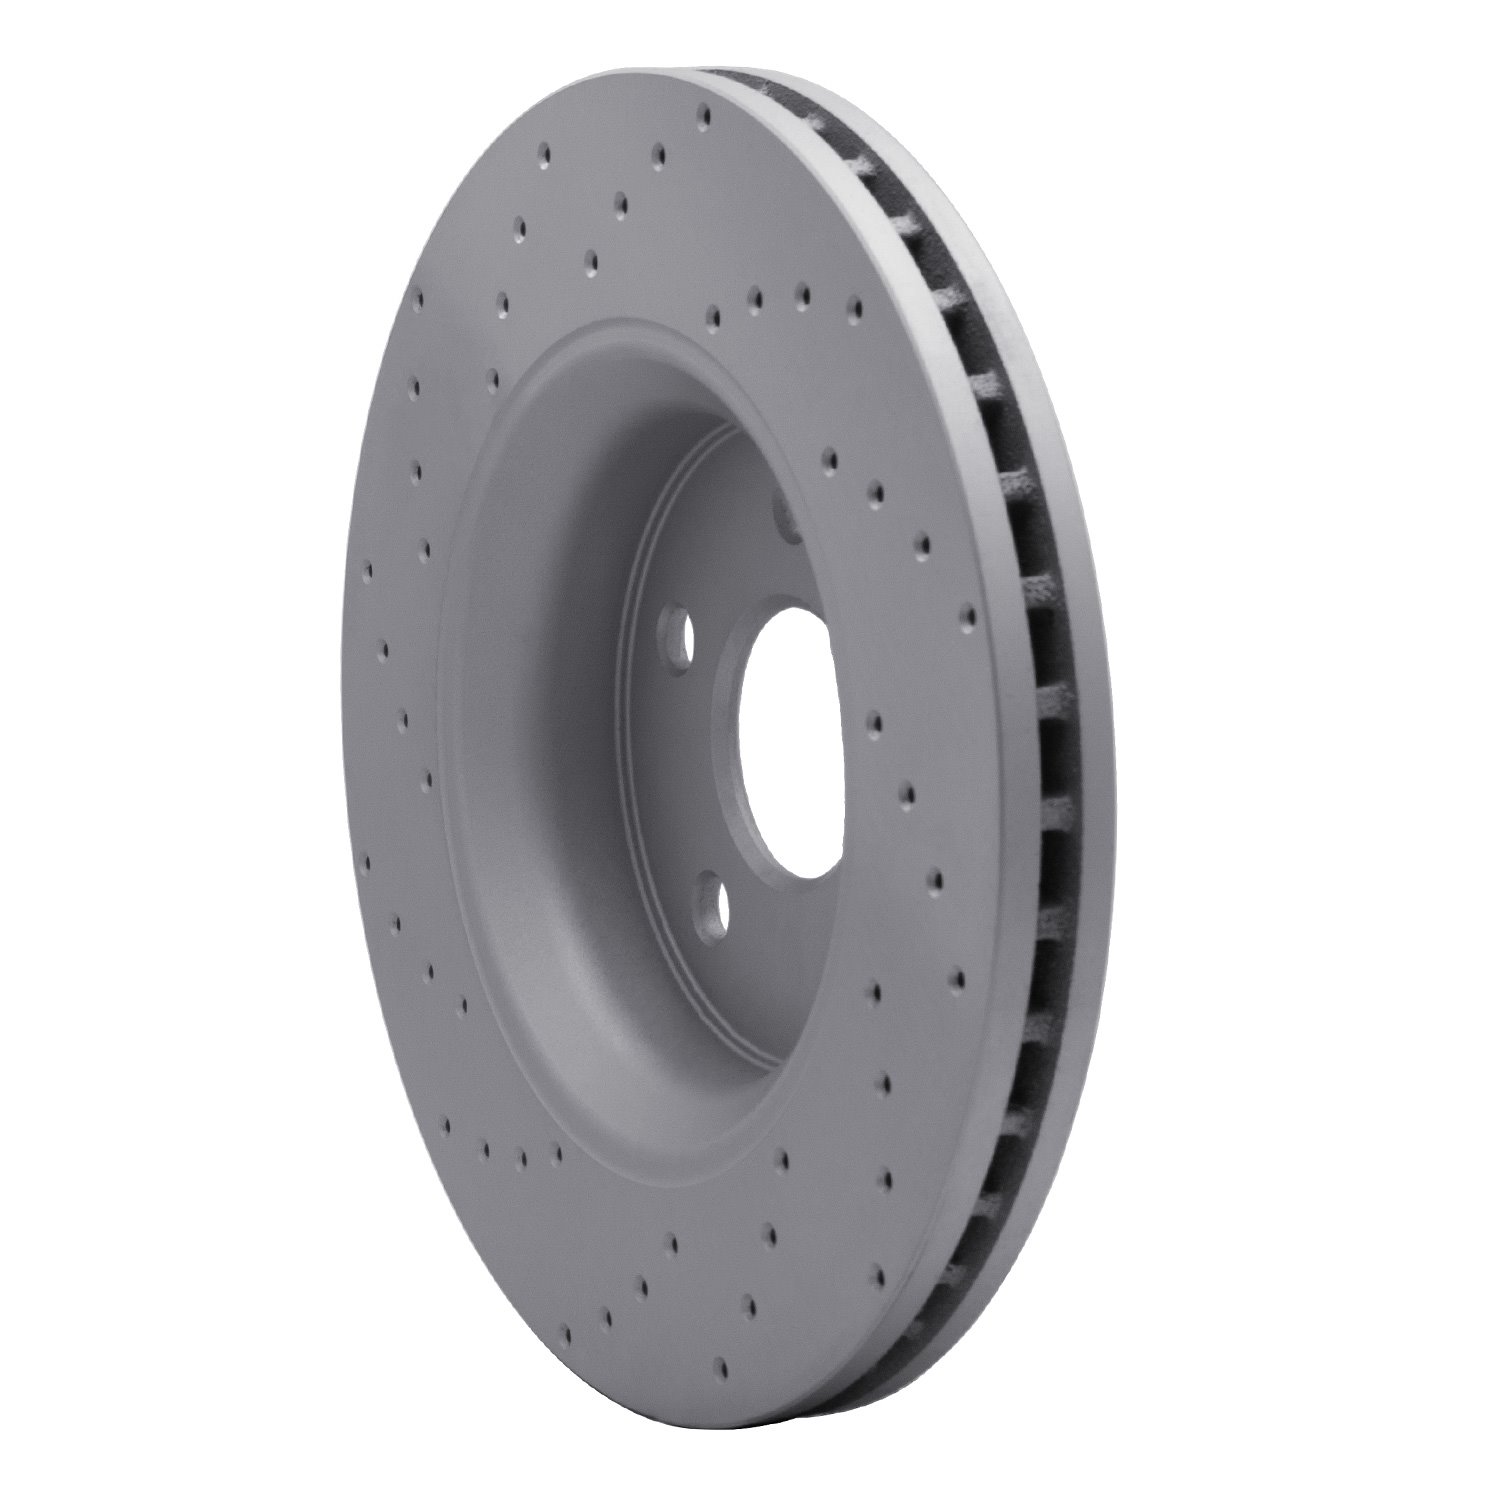 820-42007R Geoperformance Drilled Brake Rotor, Fits Select Mopar, Position: Front Right